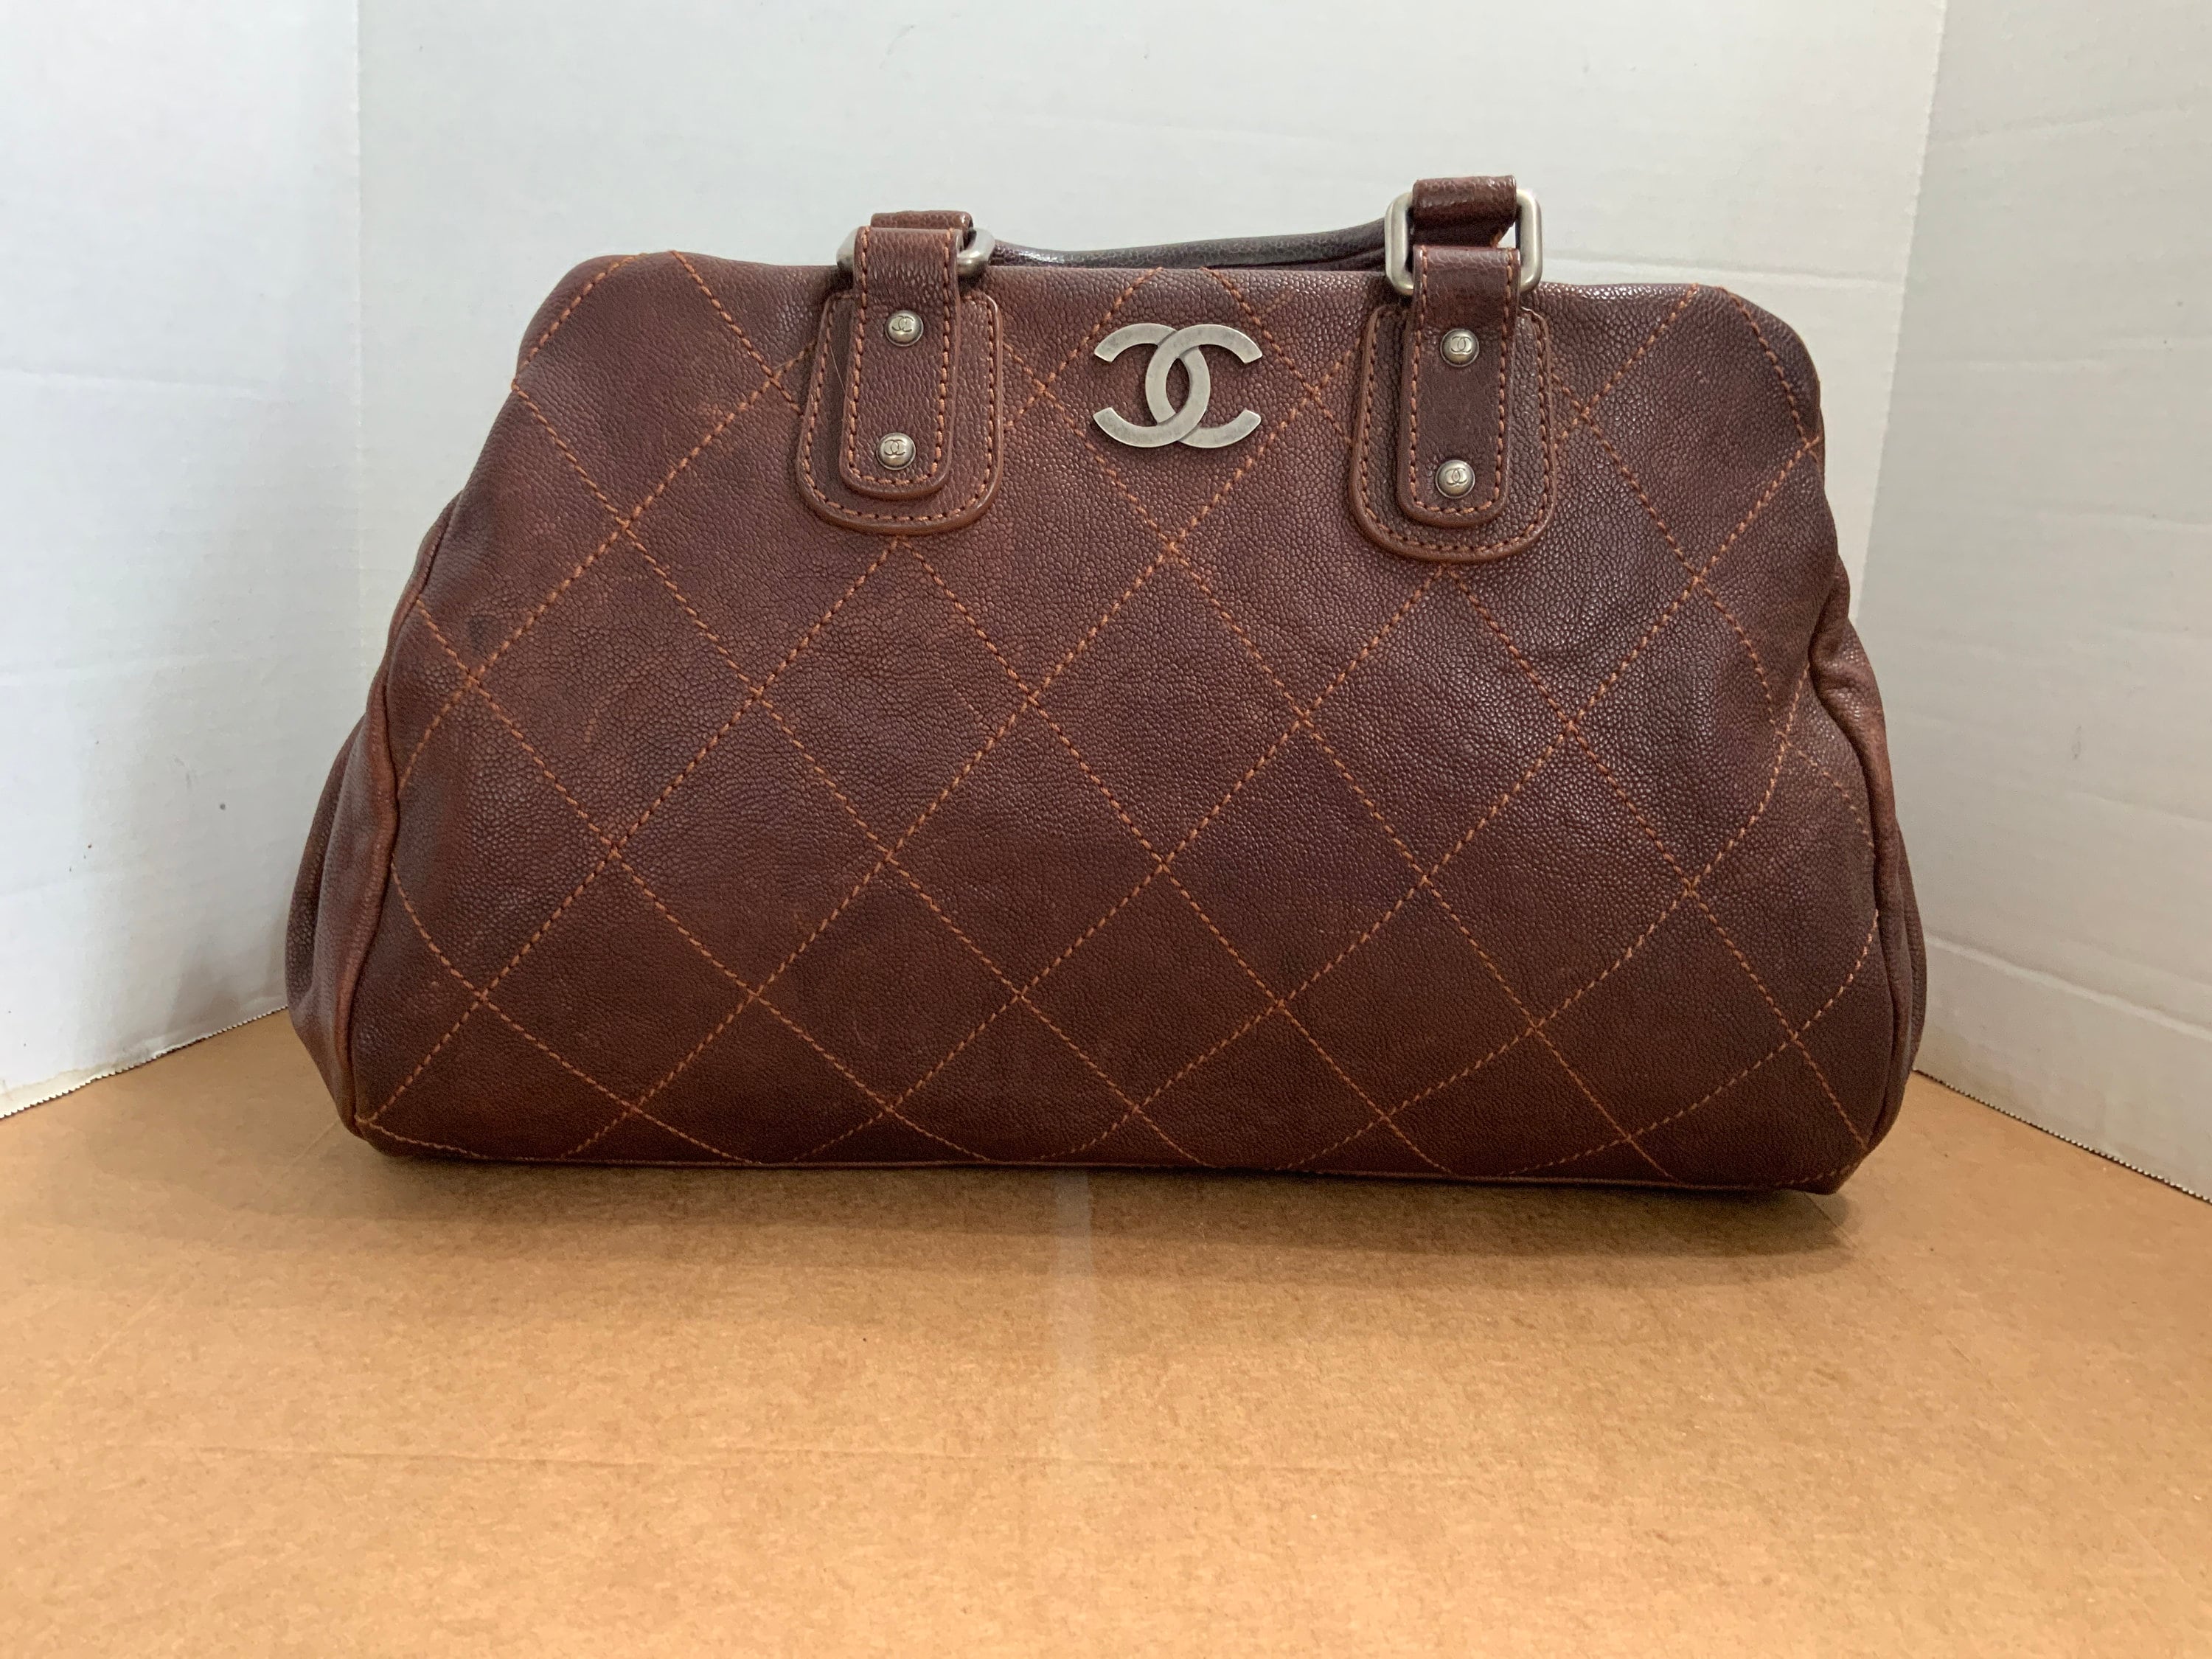 Authentic Chanel Doctor Bag 